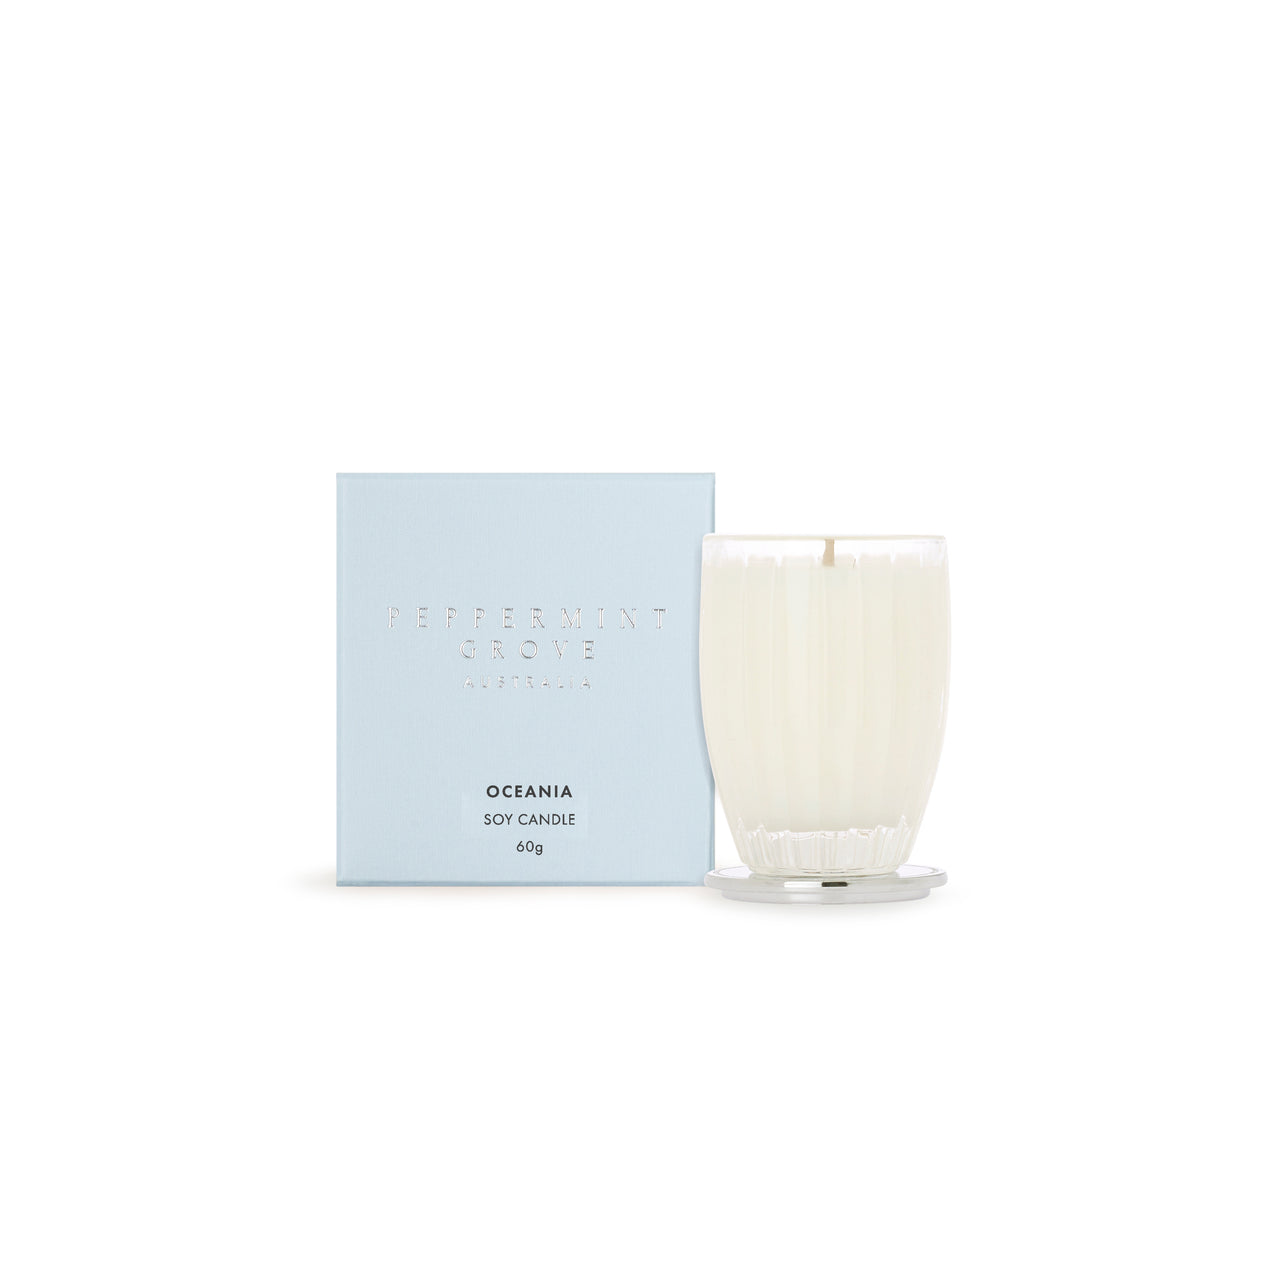 Oceania Soy Candle